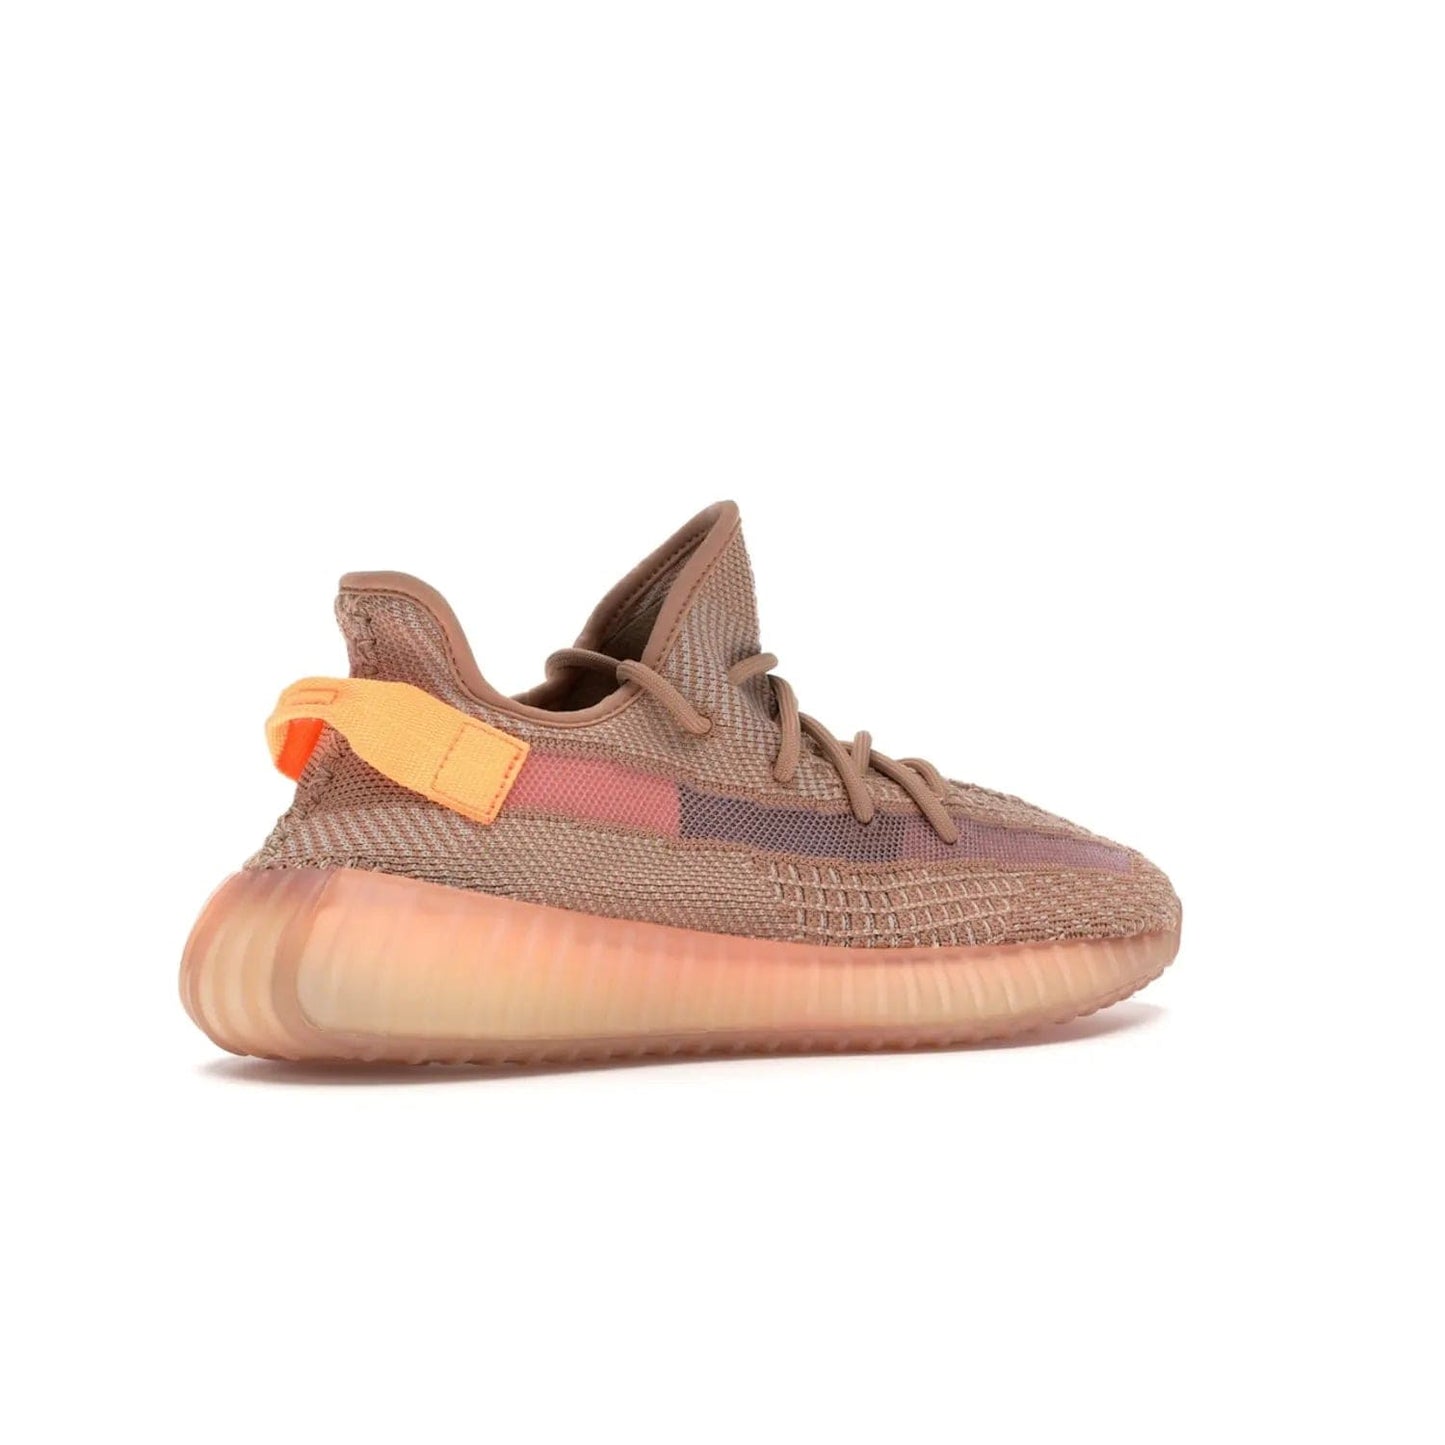 adidas Yeezy Boost 350 V2 Clay - Image 34 - Only at www.BallersClubKickz.com - The adidas Yeezy Boost 350 V2 Clay - style and swag in one shoe. Orange accents, clay midsole and sole. Get yours today!